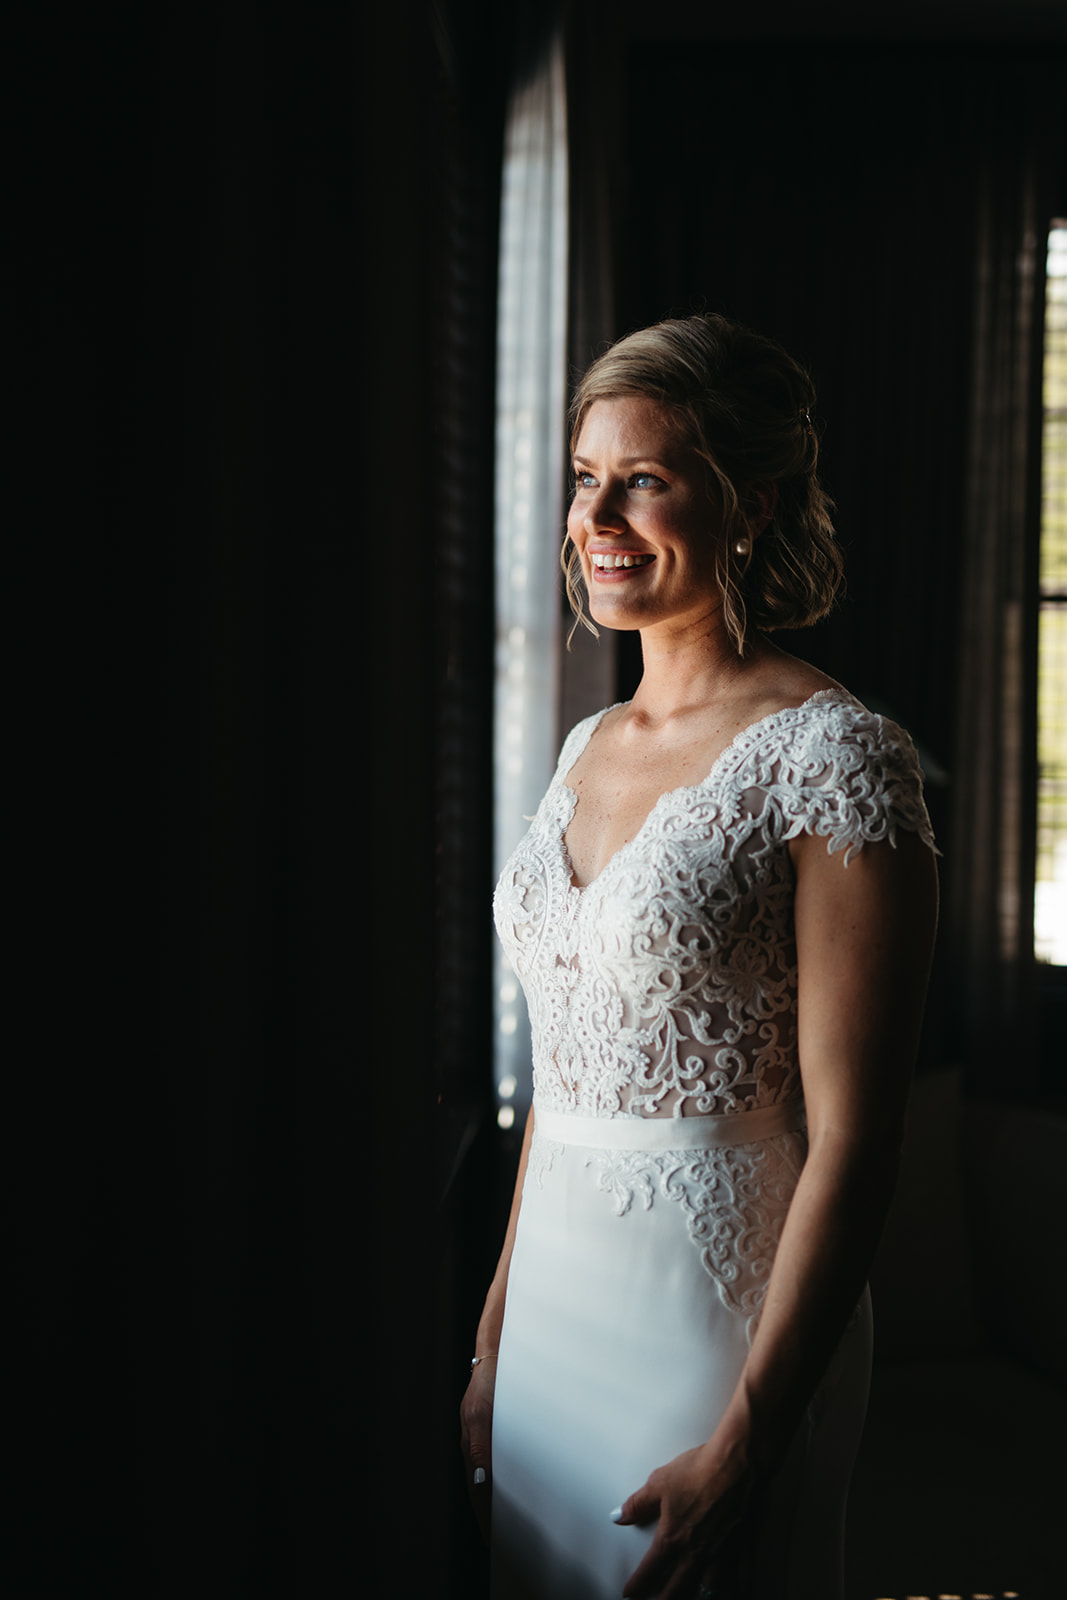 Bride in white dress standing by the window